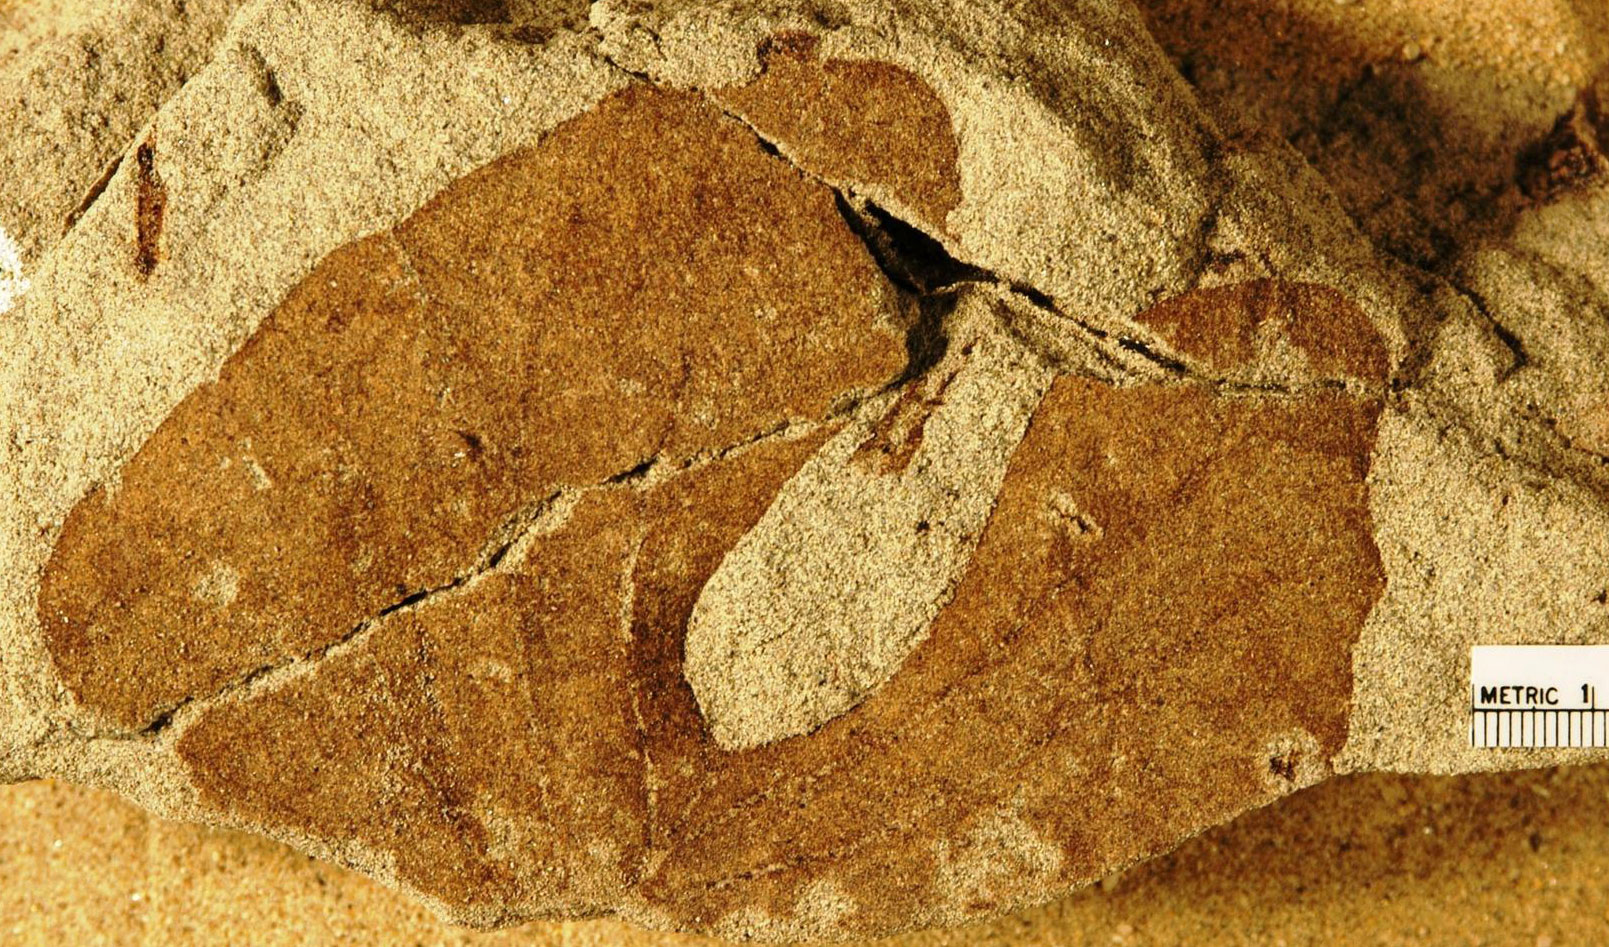 Photograph of a fossil tulip-poplar-like leaf from the Cretaceous Hell Creek Formation of North Dakota. The photo shows a deeply bilobed leaf with an otherwise smooth margin preserved in a sandy rock matrix. The leaf is orangish-brown, the matrix tan.